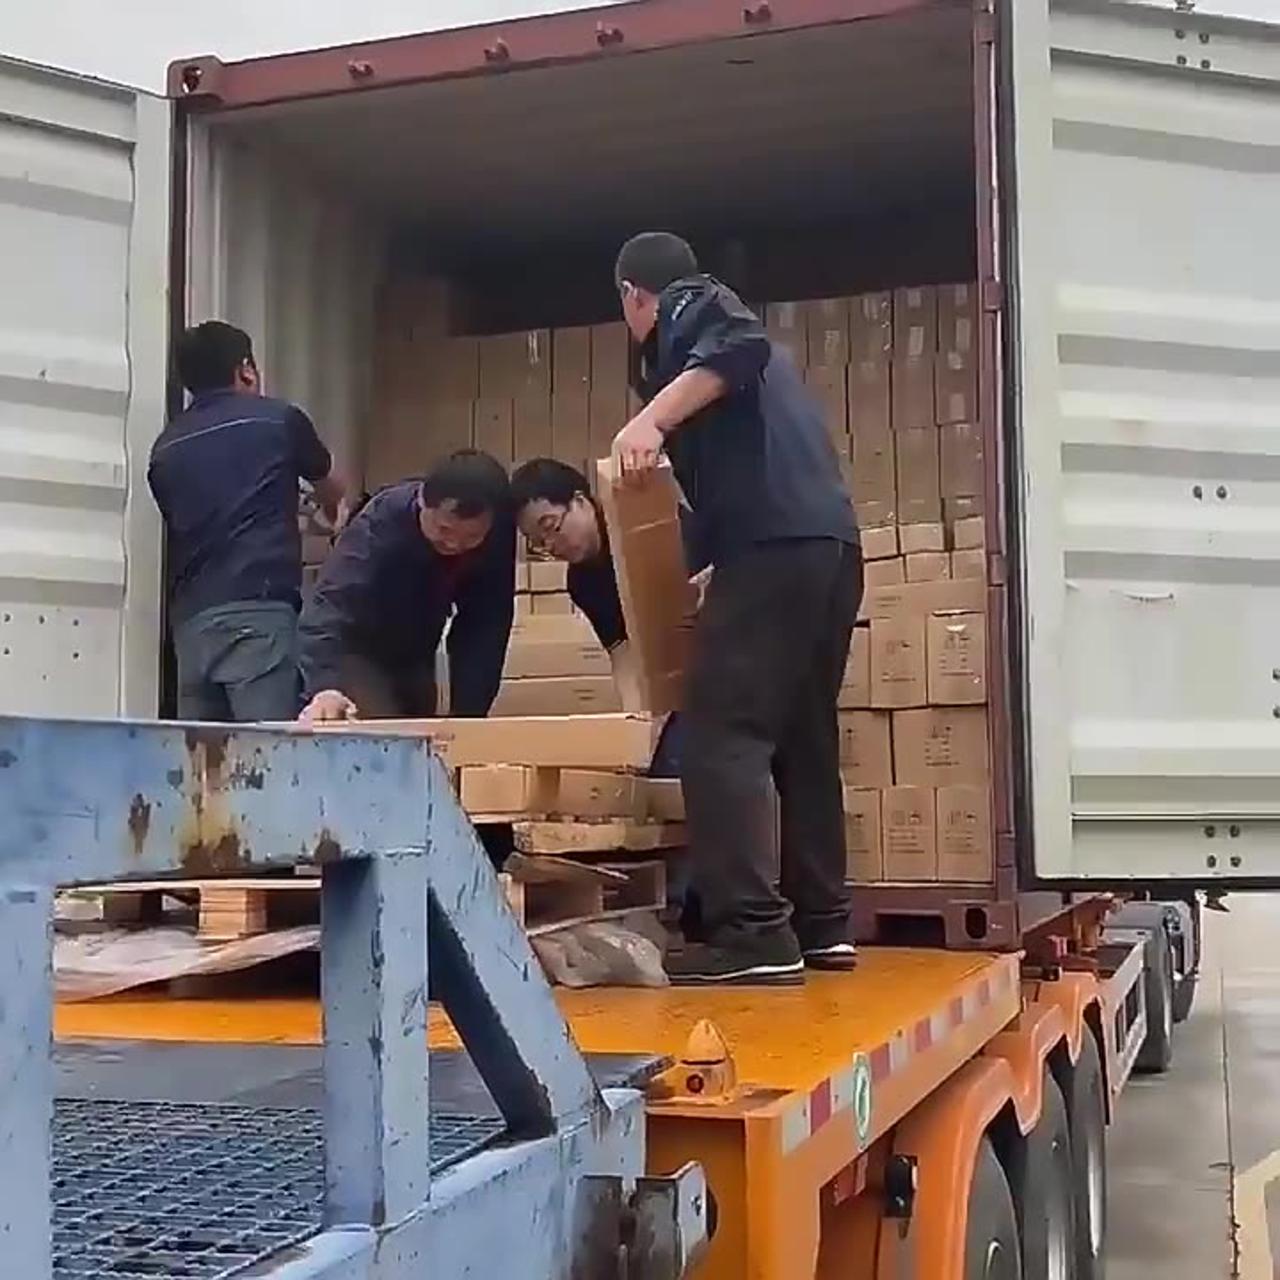 loading product